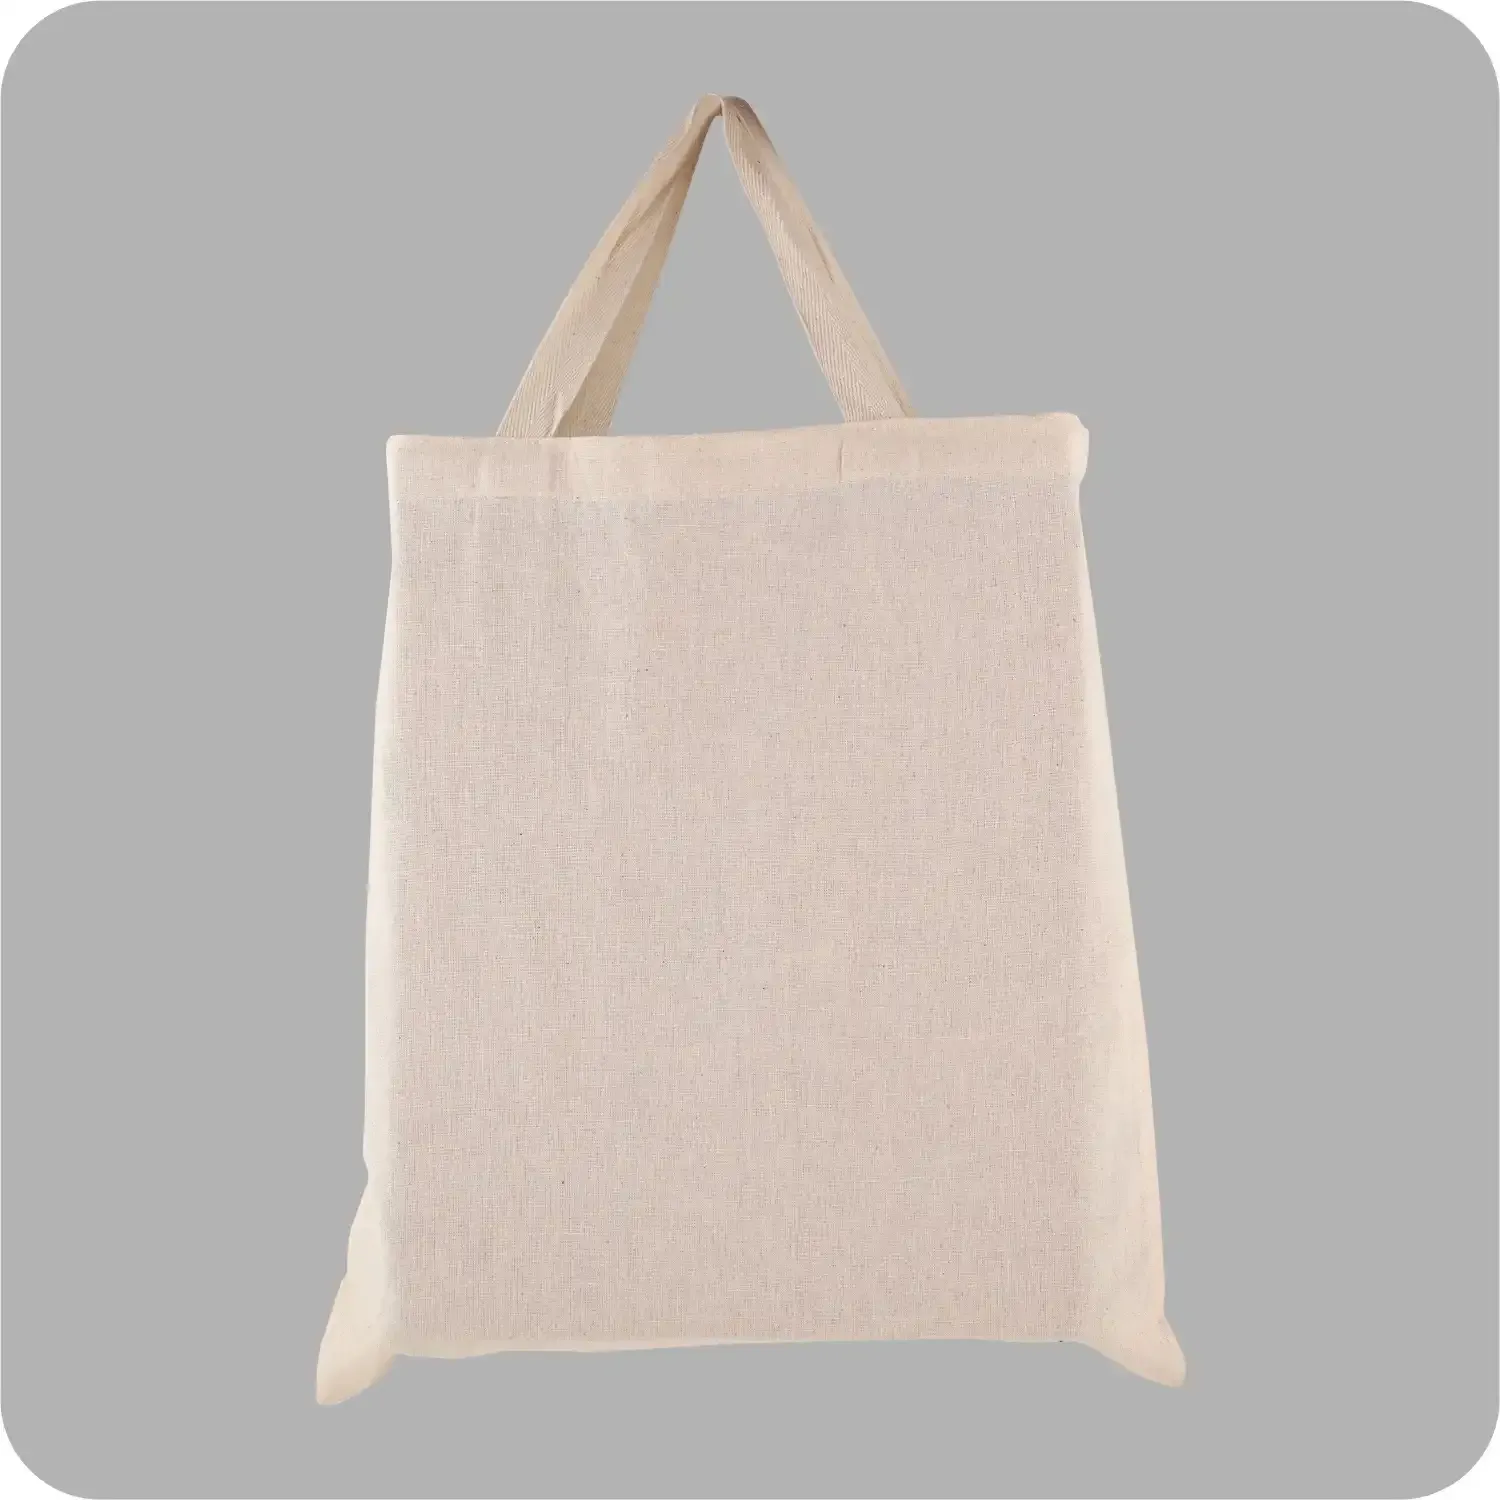 16”x16” Double Stitched Uniquely Styled Cotton Bag(Pack of 100)